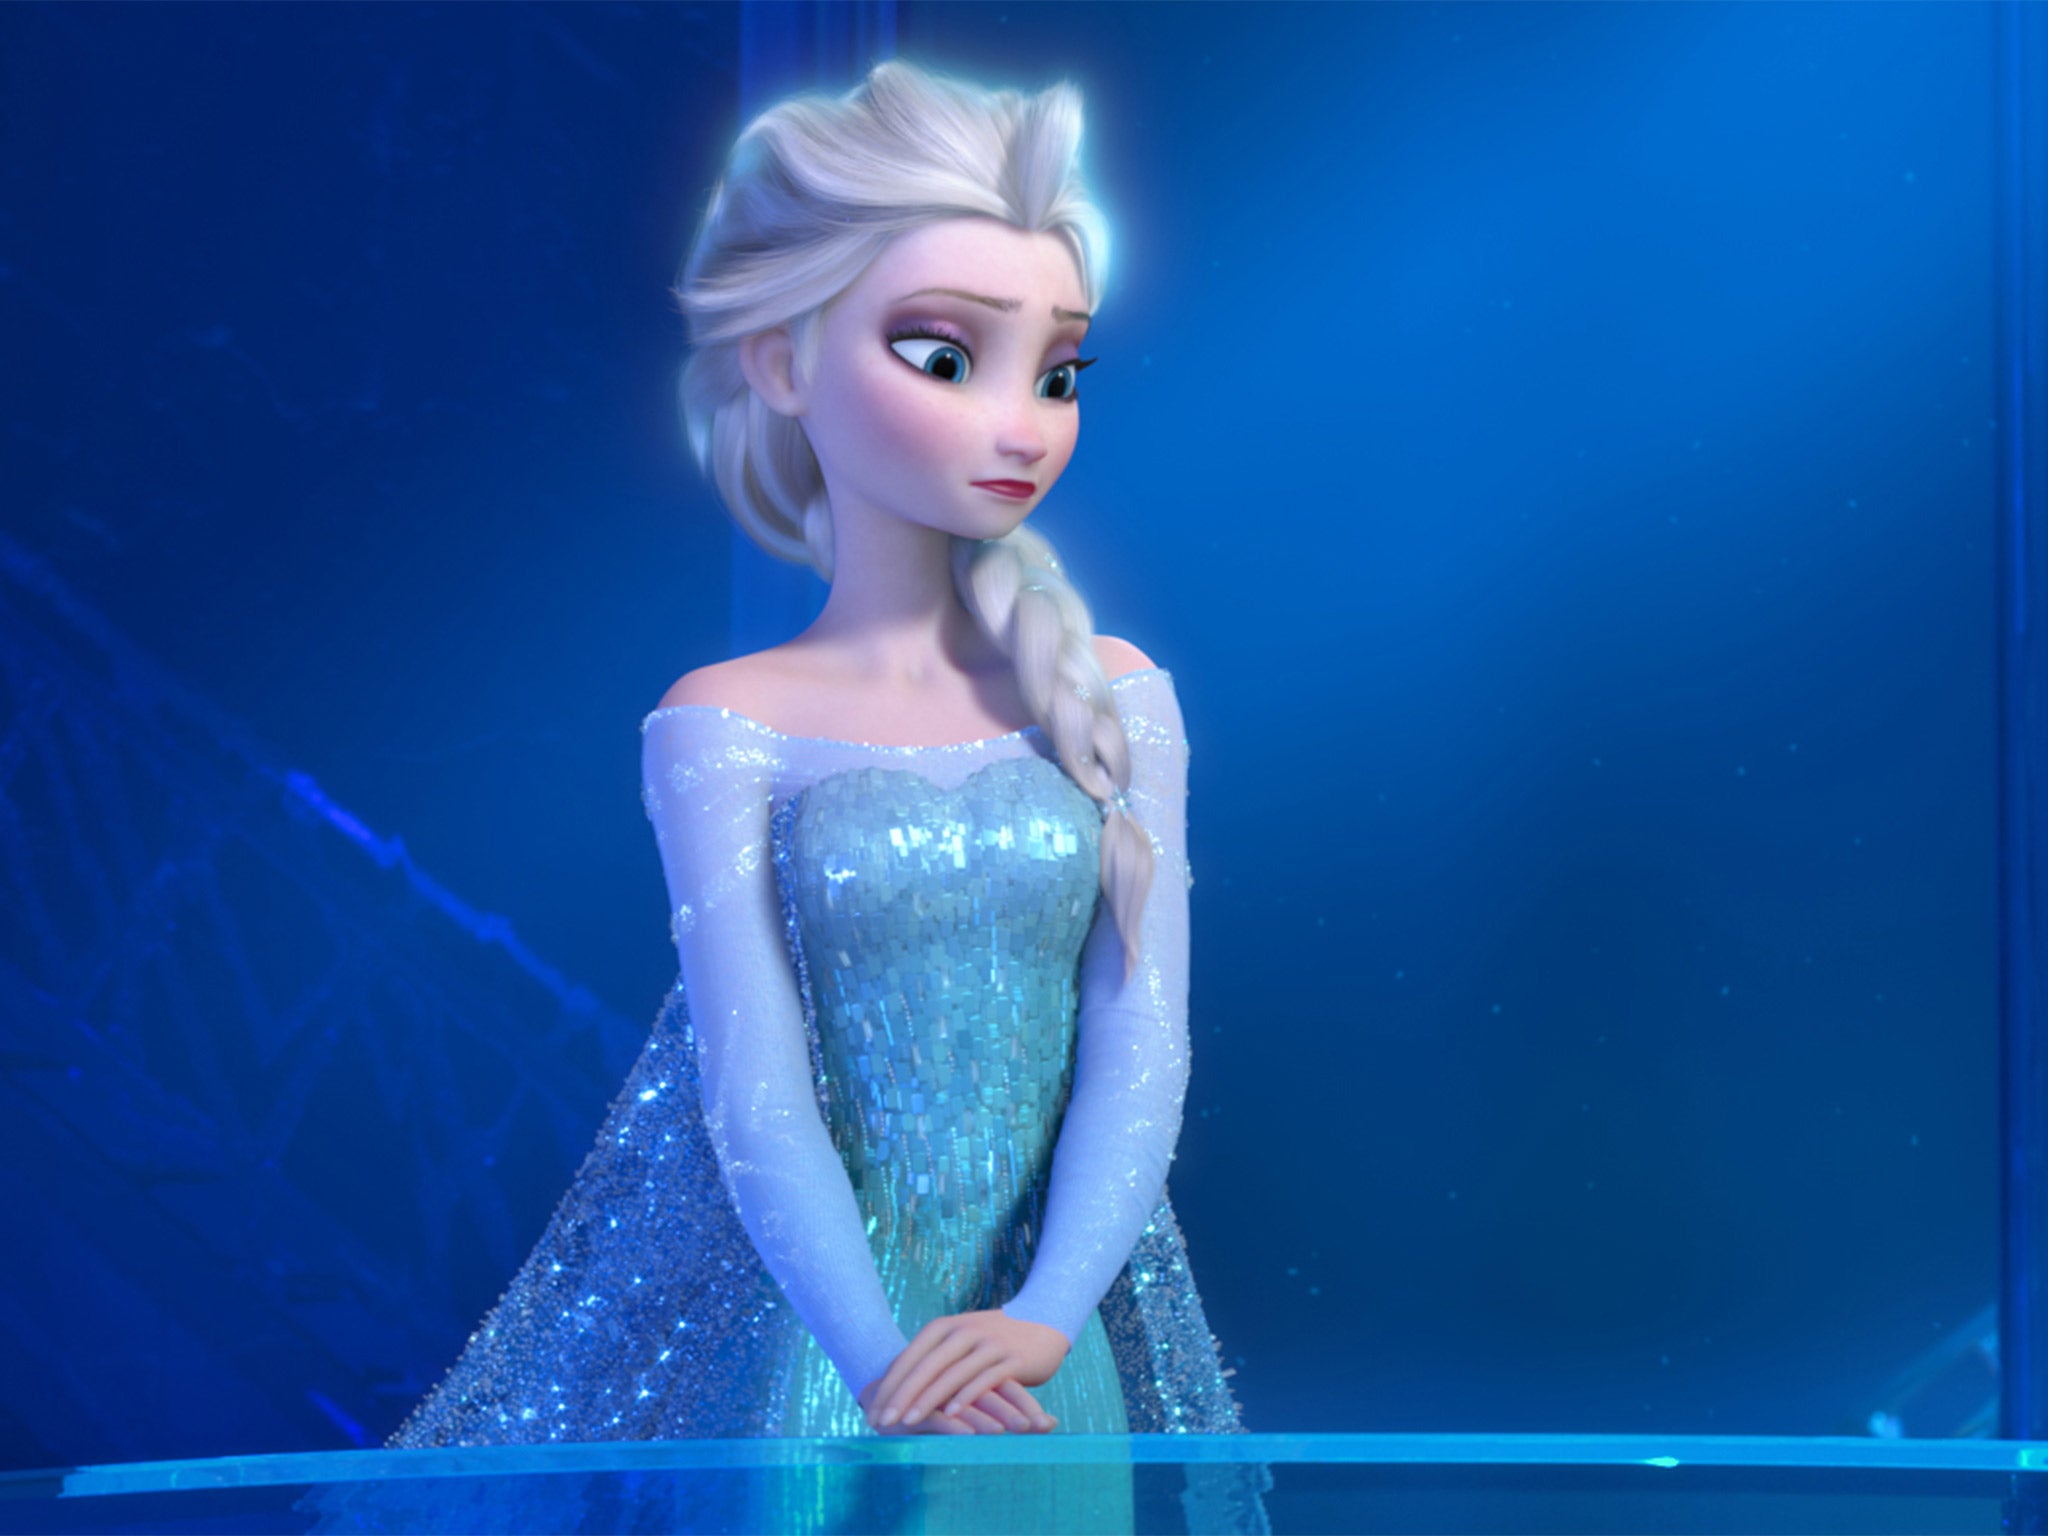 Jameela Jamil says she won't miss having to listen to 'Let it Go' from Frozen by Idina Menzel